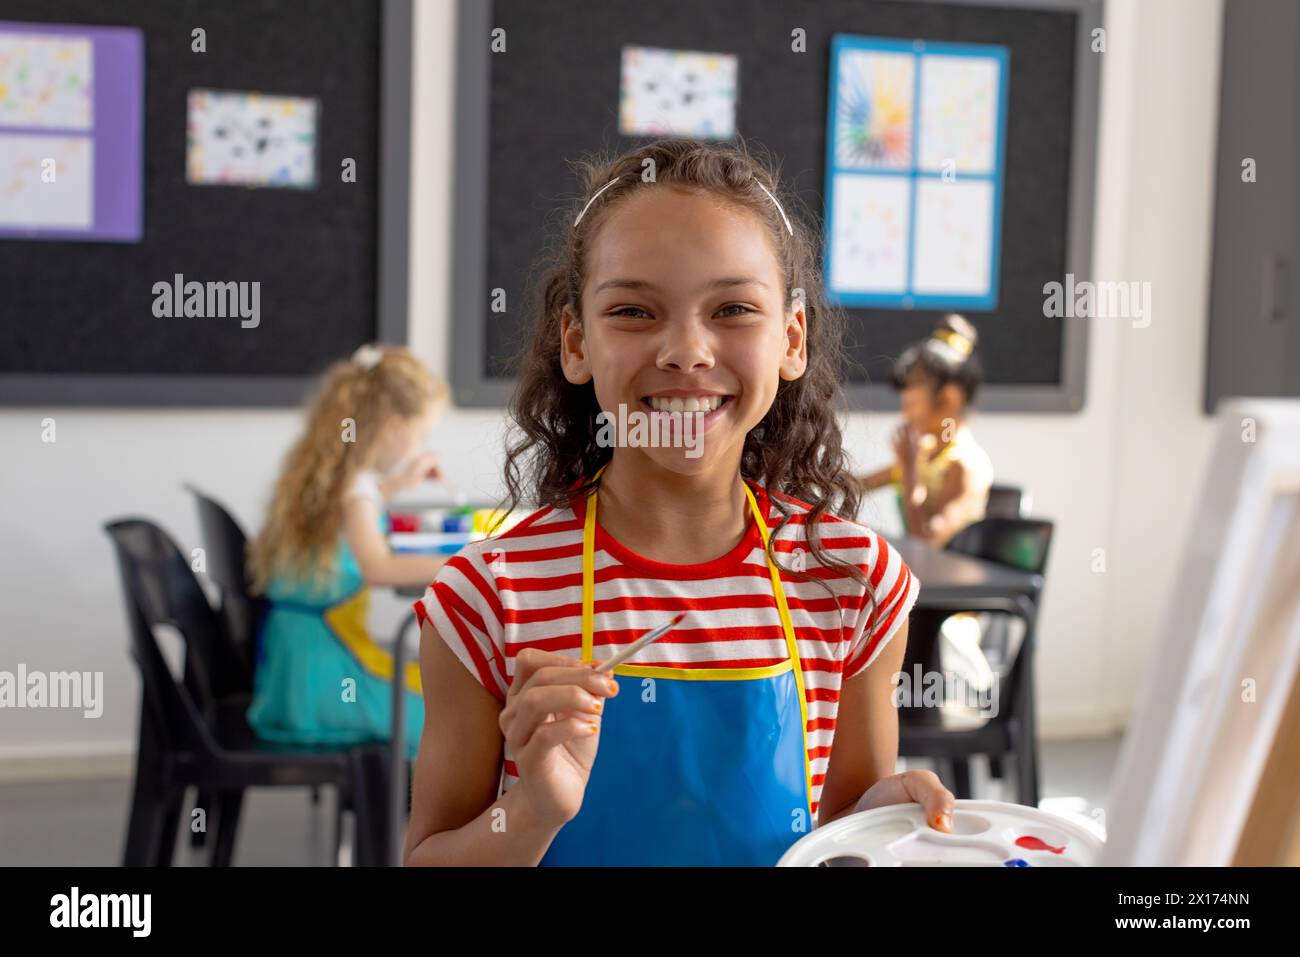 In school art class, biracial young girl holding a paintbrush smiles at camera Stock Photo